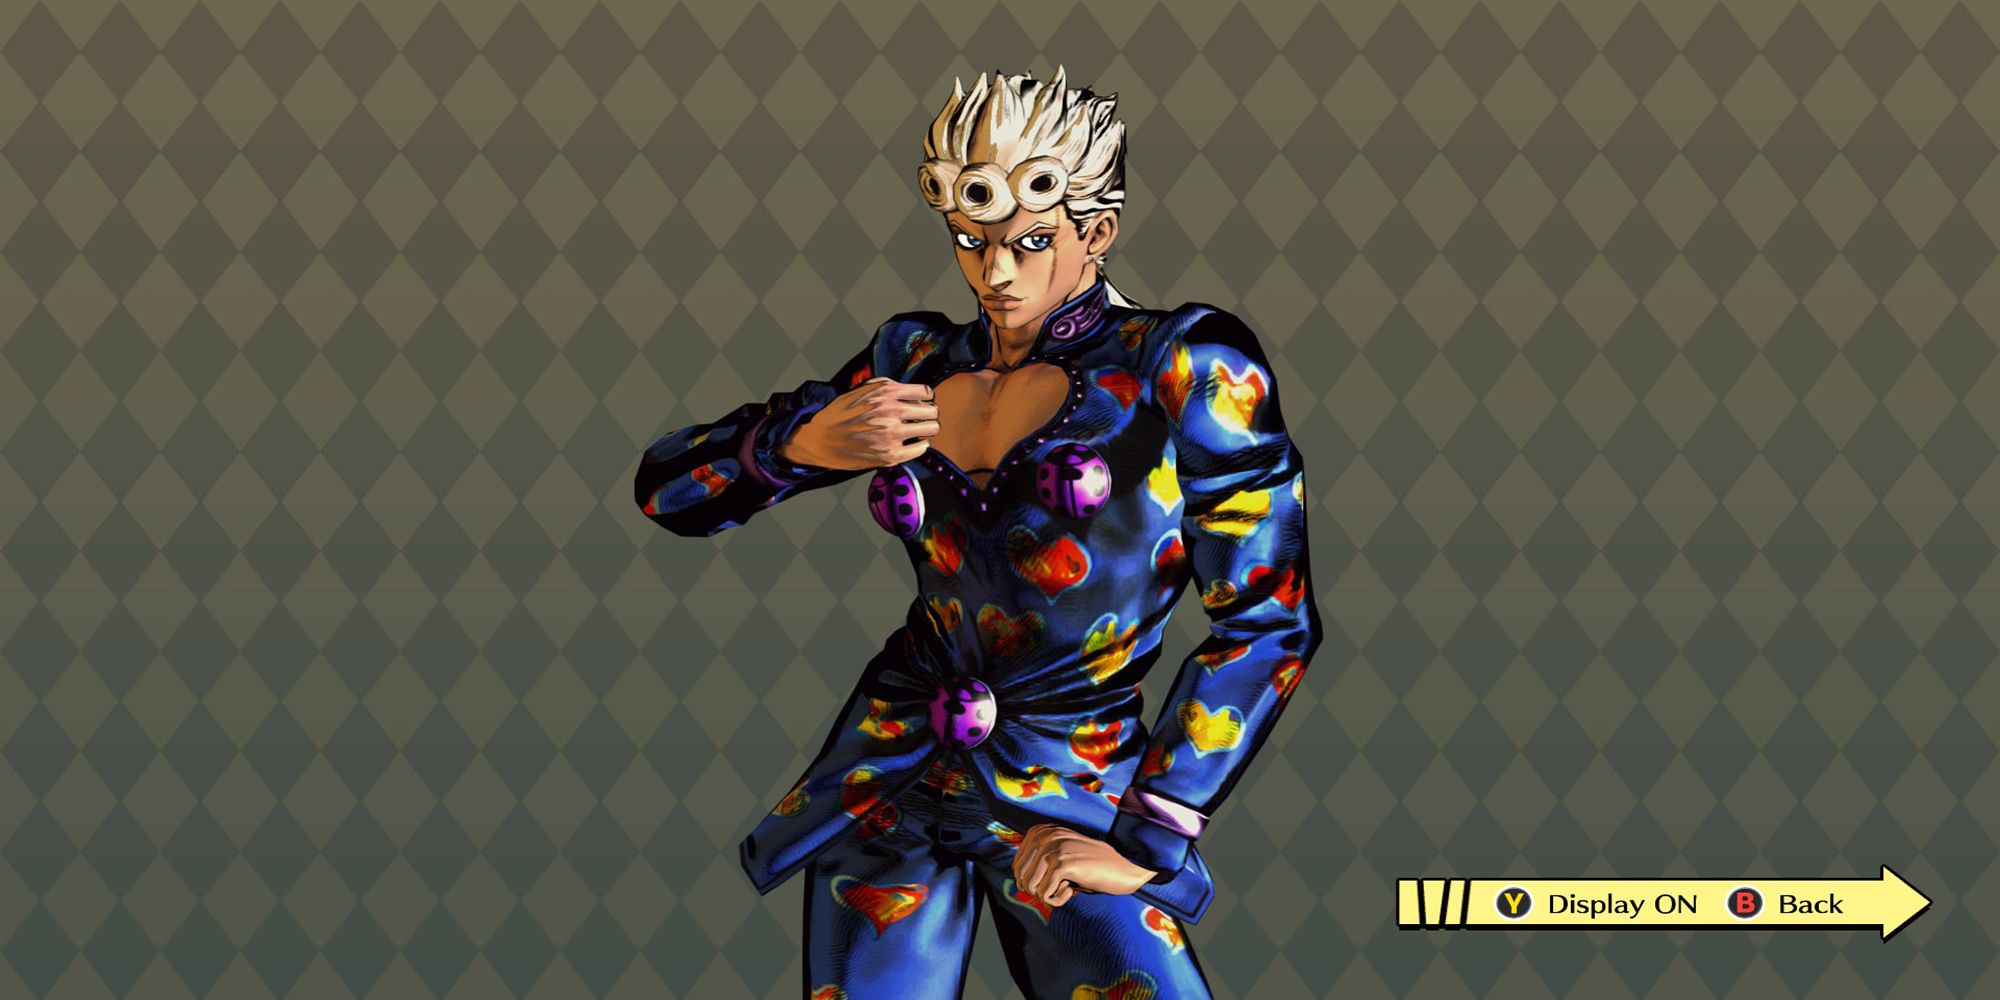 Giorno Giovanna dons sleek blue suit with colorful hearts adorning it. This outfit is unlockable after completing sixty panels in ASB Mode in JoJo's Bizarre Adventure: ASBR.